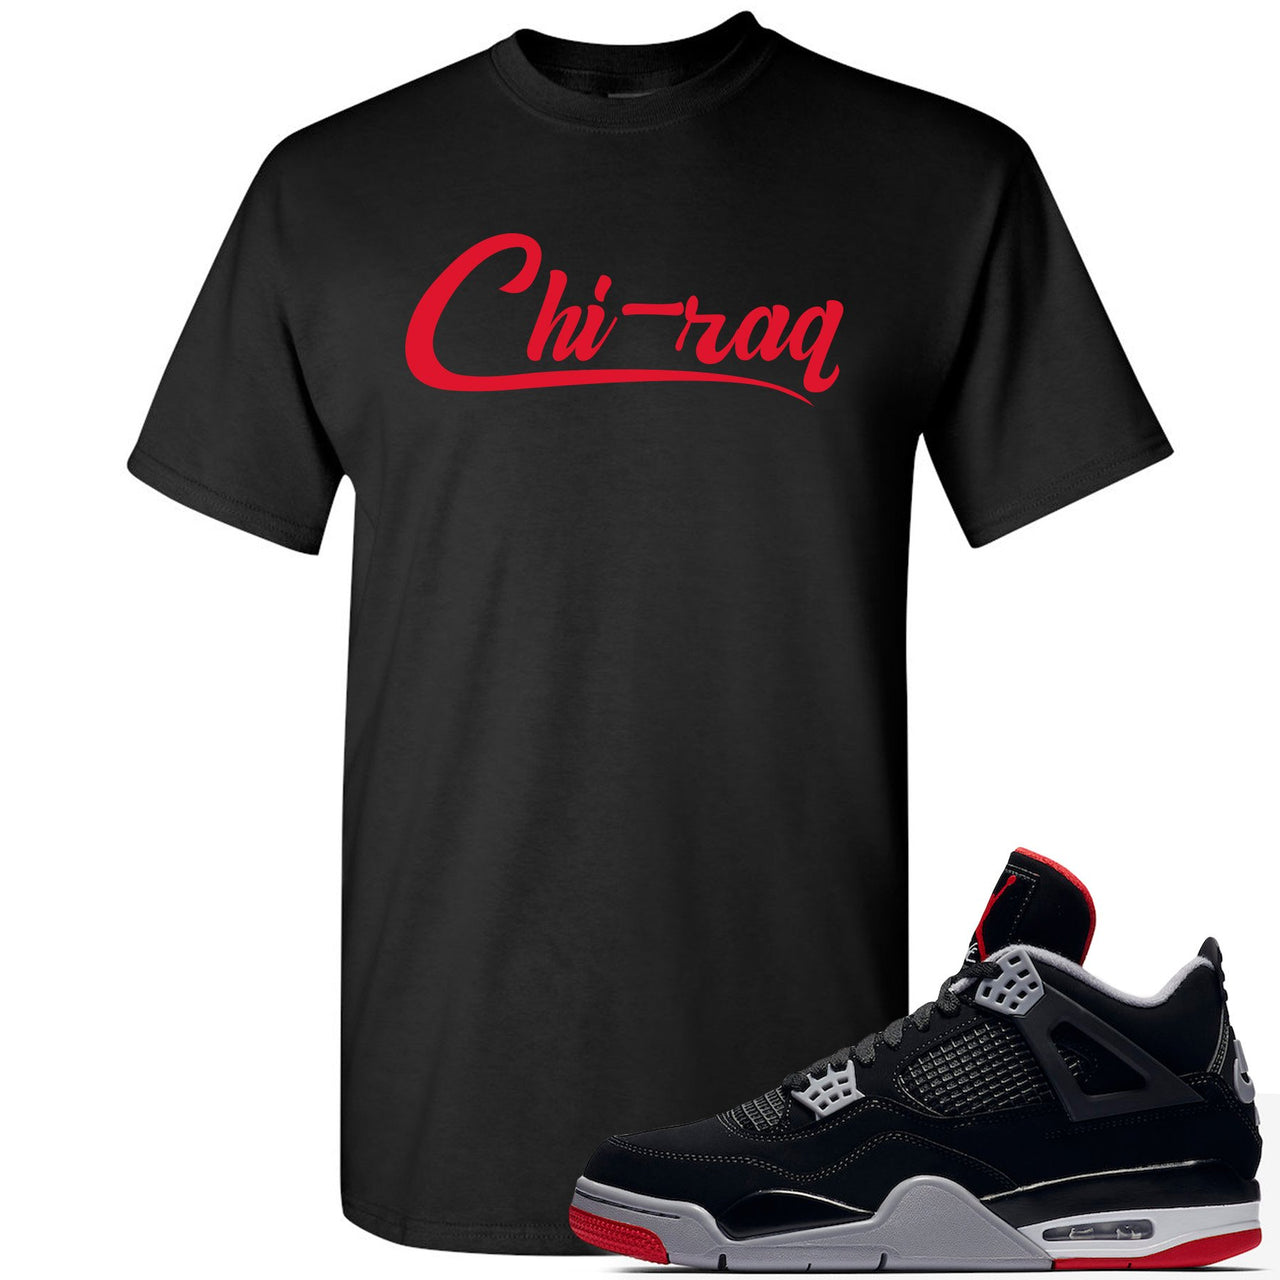 This black and red t-shirt will match great with your Air Jordan 4 Bred shoes